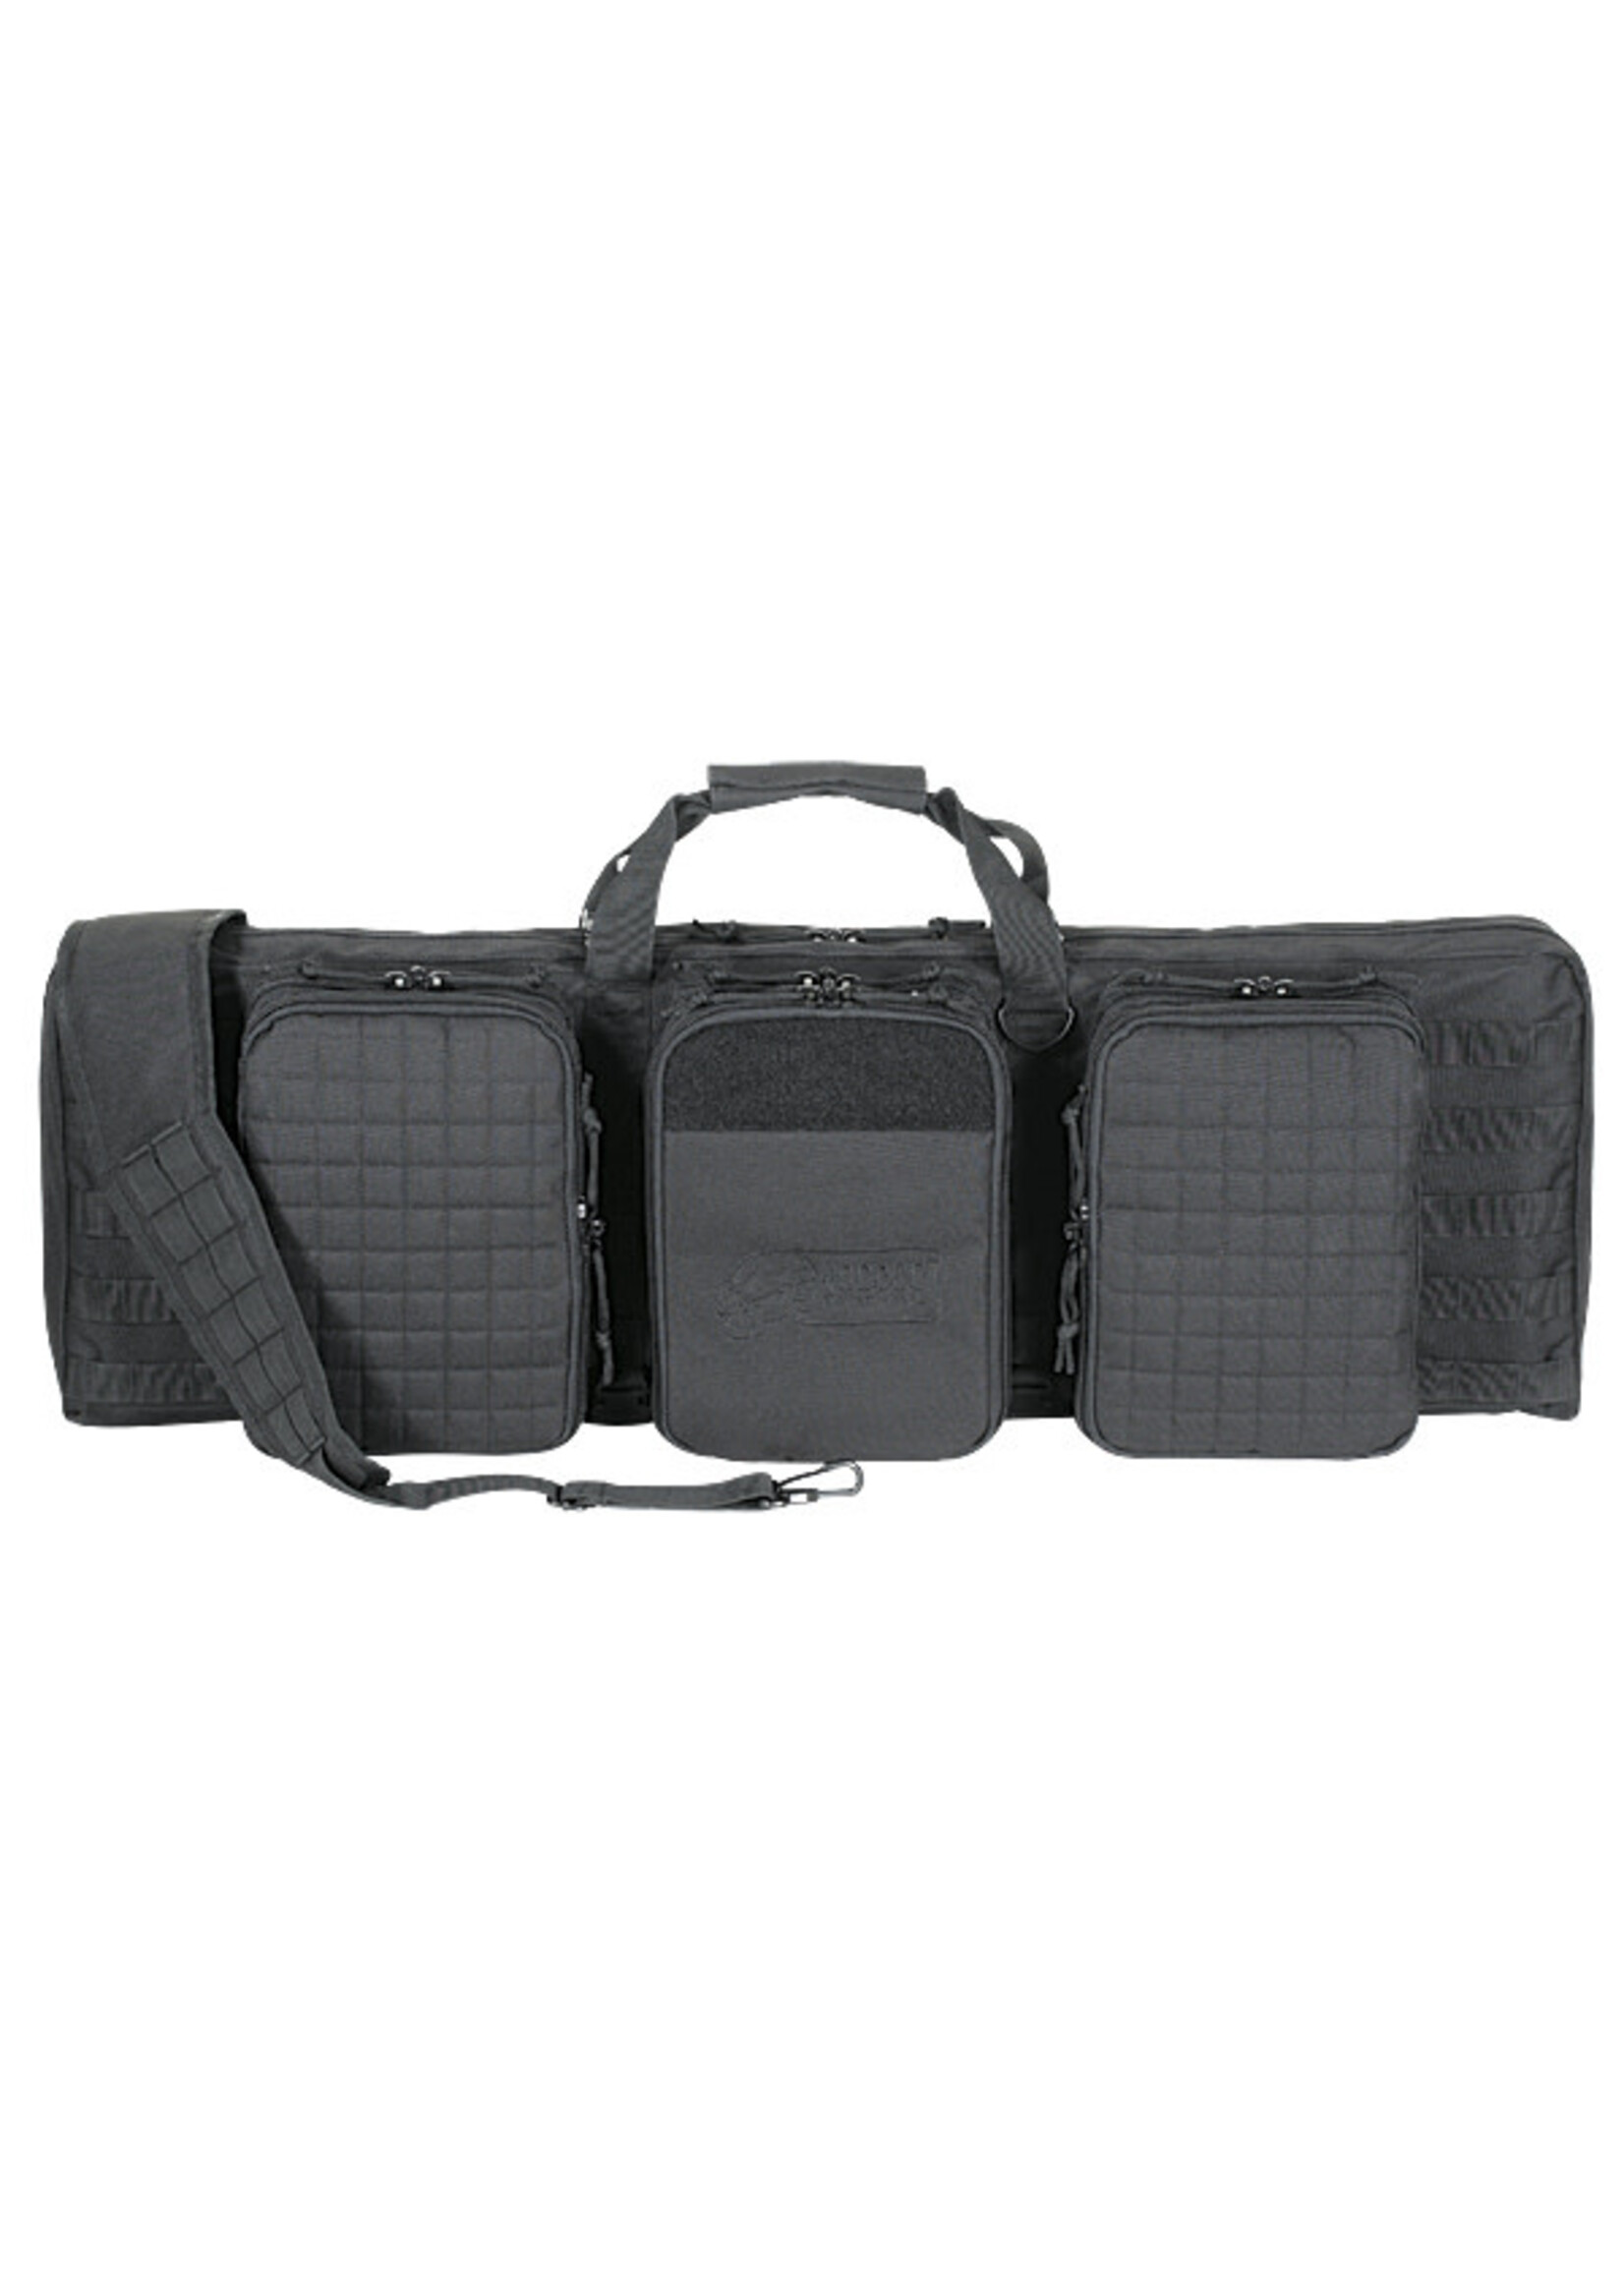 VOODOO TACTICAL 36" DELUXE PADDED WEAPONS CASE BLACK